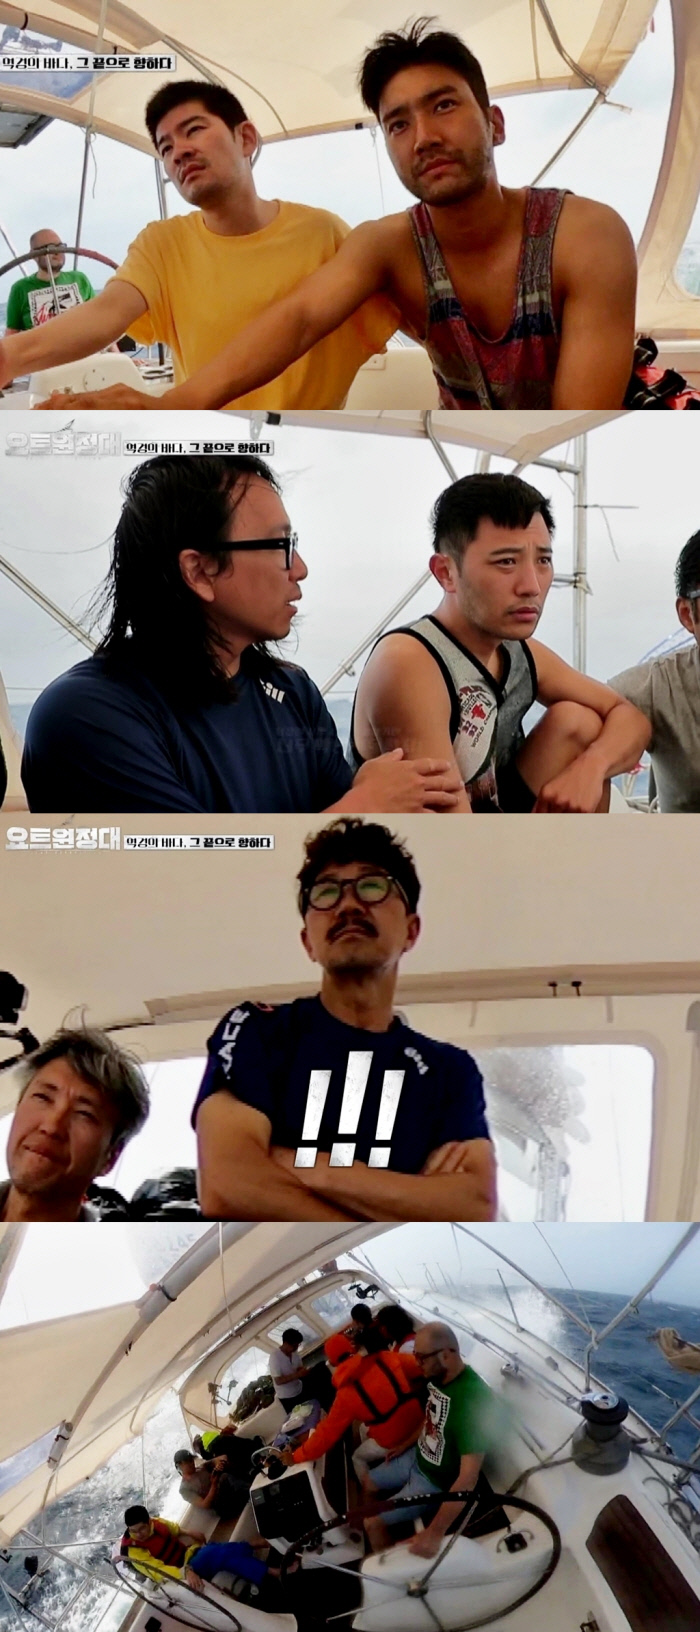 Yot Expedition Jin Goo - Choi Siwon - Chang Kiha - Song Ho-joon is hit by the worst Danger ever since the voyage.In the 6th episode of MBC Everlons Yacht Expedition, which will be broadcast on September 21 (Mon), it shows Jin Goo - Choi Siwon - Chang Kiha - Song Ho-joon, who is driven by the extremes of the heavy storm.The Pacific Ocean survival period of the Yot Expedition members who feel the power of Mother Nature through their bodies will be unfolded realistically.The yacht expedition members, who were hit by the 6th day of the voyage, were said to have become white due to the power of typhoons on the sea that they have encountered for the first time in their lives.The crew tried to hold on, but they were mentally and physically exhausted in situations that were not as good as they were.To make matters worse, all of them were in an inability to communicate with the support line.At this time, Captain Kim Seung-jin made an emergency proposal to the crew as if he had decided something.However, no one could answer it, and Chang Kiha had come to ask the production team to stop shooting.The appearance of the first conflict with the unusual person who hovers around the yacht makes the tension soar with the previous class Danger.It was a yacht expedition that continued the Pacific Ocean voyage with the aim of the South Cross.In the meantime, Storm, who met in the past, said that he drove the sailing of the yacht expedition to the worst situation that he could not see ahead.And for the first time, he was even confused, and Danger in the yacht was silent.In an uncontrollable situation, Jin Goo, who was always passionate, and his delightful eldest brother Song Ho-joon showed tears, amplifying their curiosity about what happened to them.What will the decision be made on the yacht expedition in the mess? It can be seen at the 6th MBC Everlon Yacht Expedition, which will be broadcast at 8:30 pm on Monday, September 21.